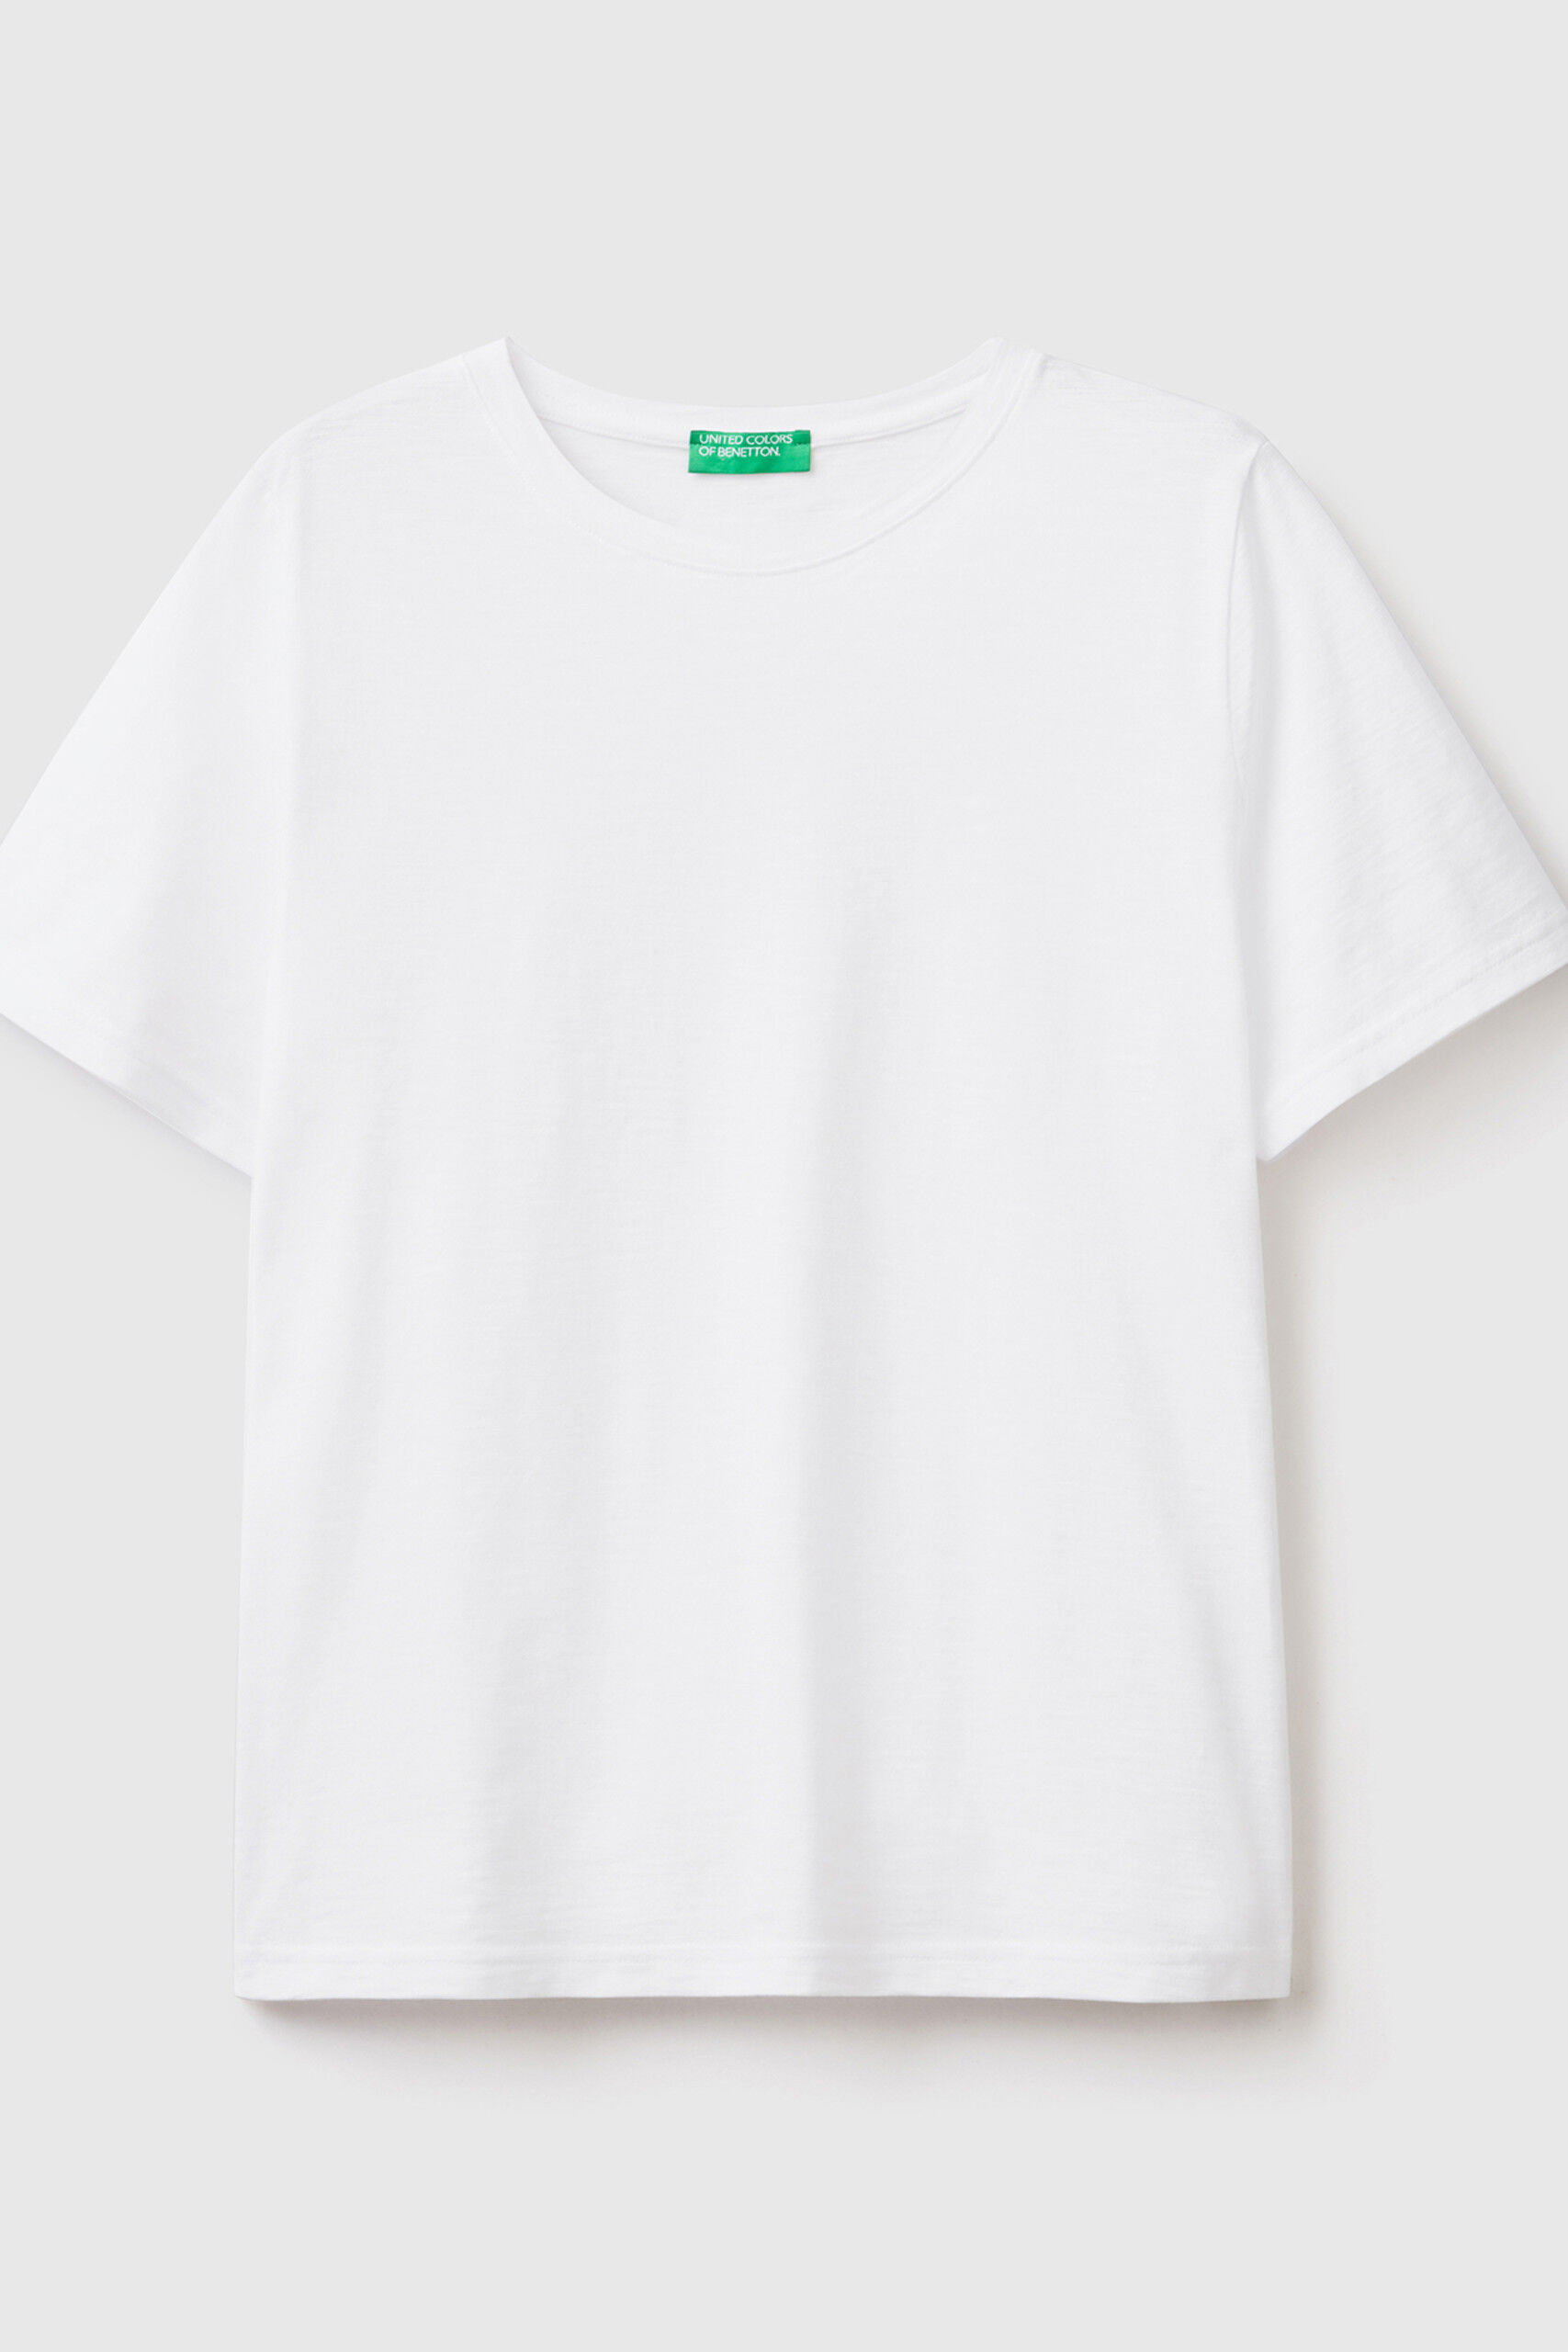 New Collection Women's Apparel 2023 | Benetton